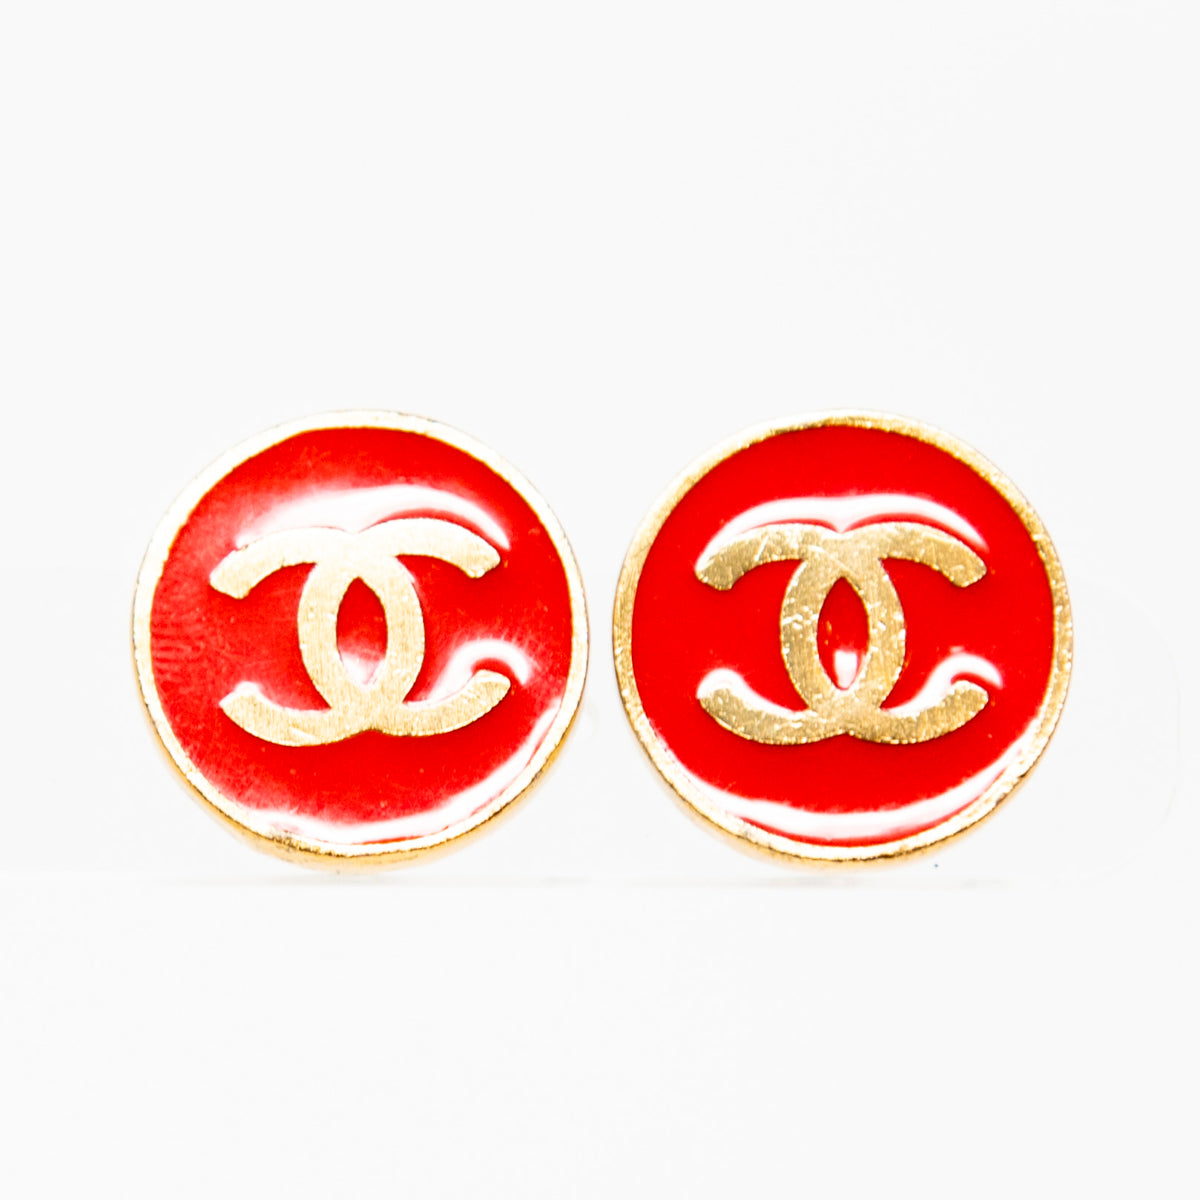 Chanel Vintage Red Button Clip On Earrings